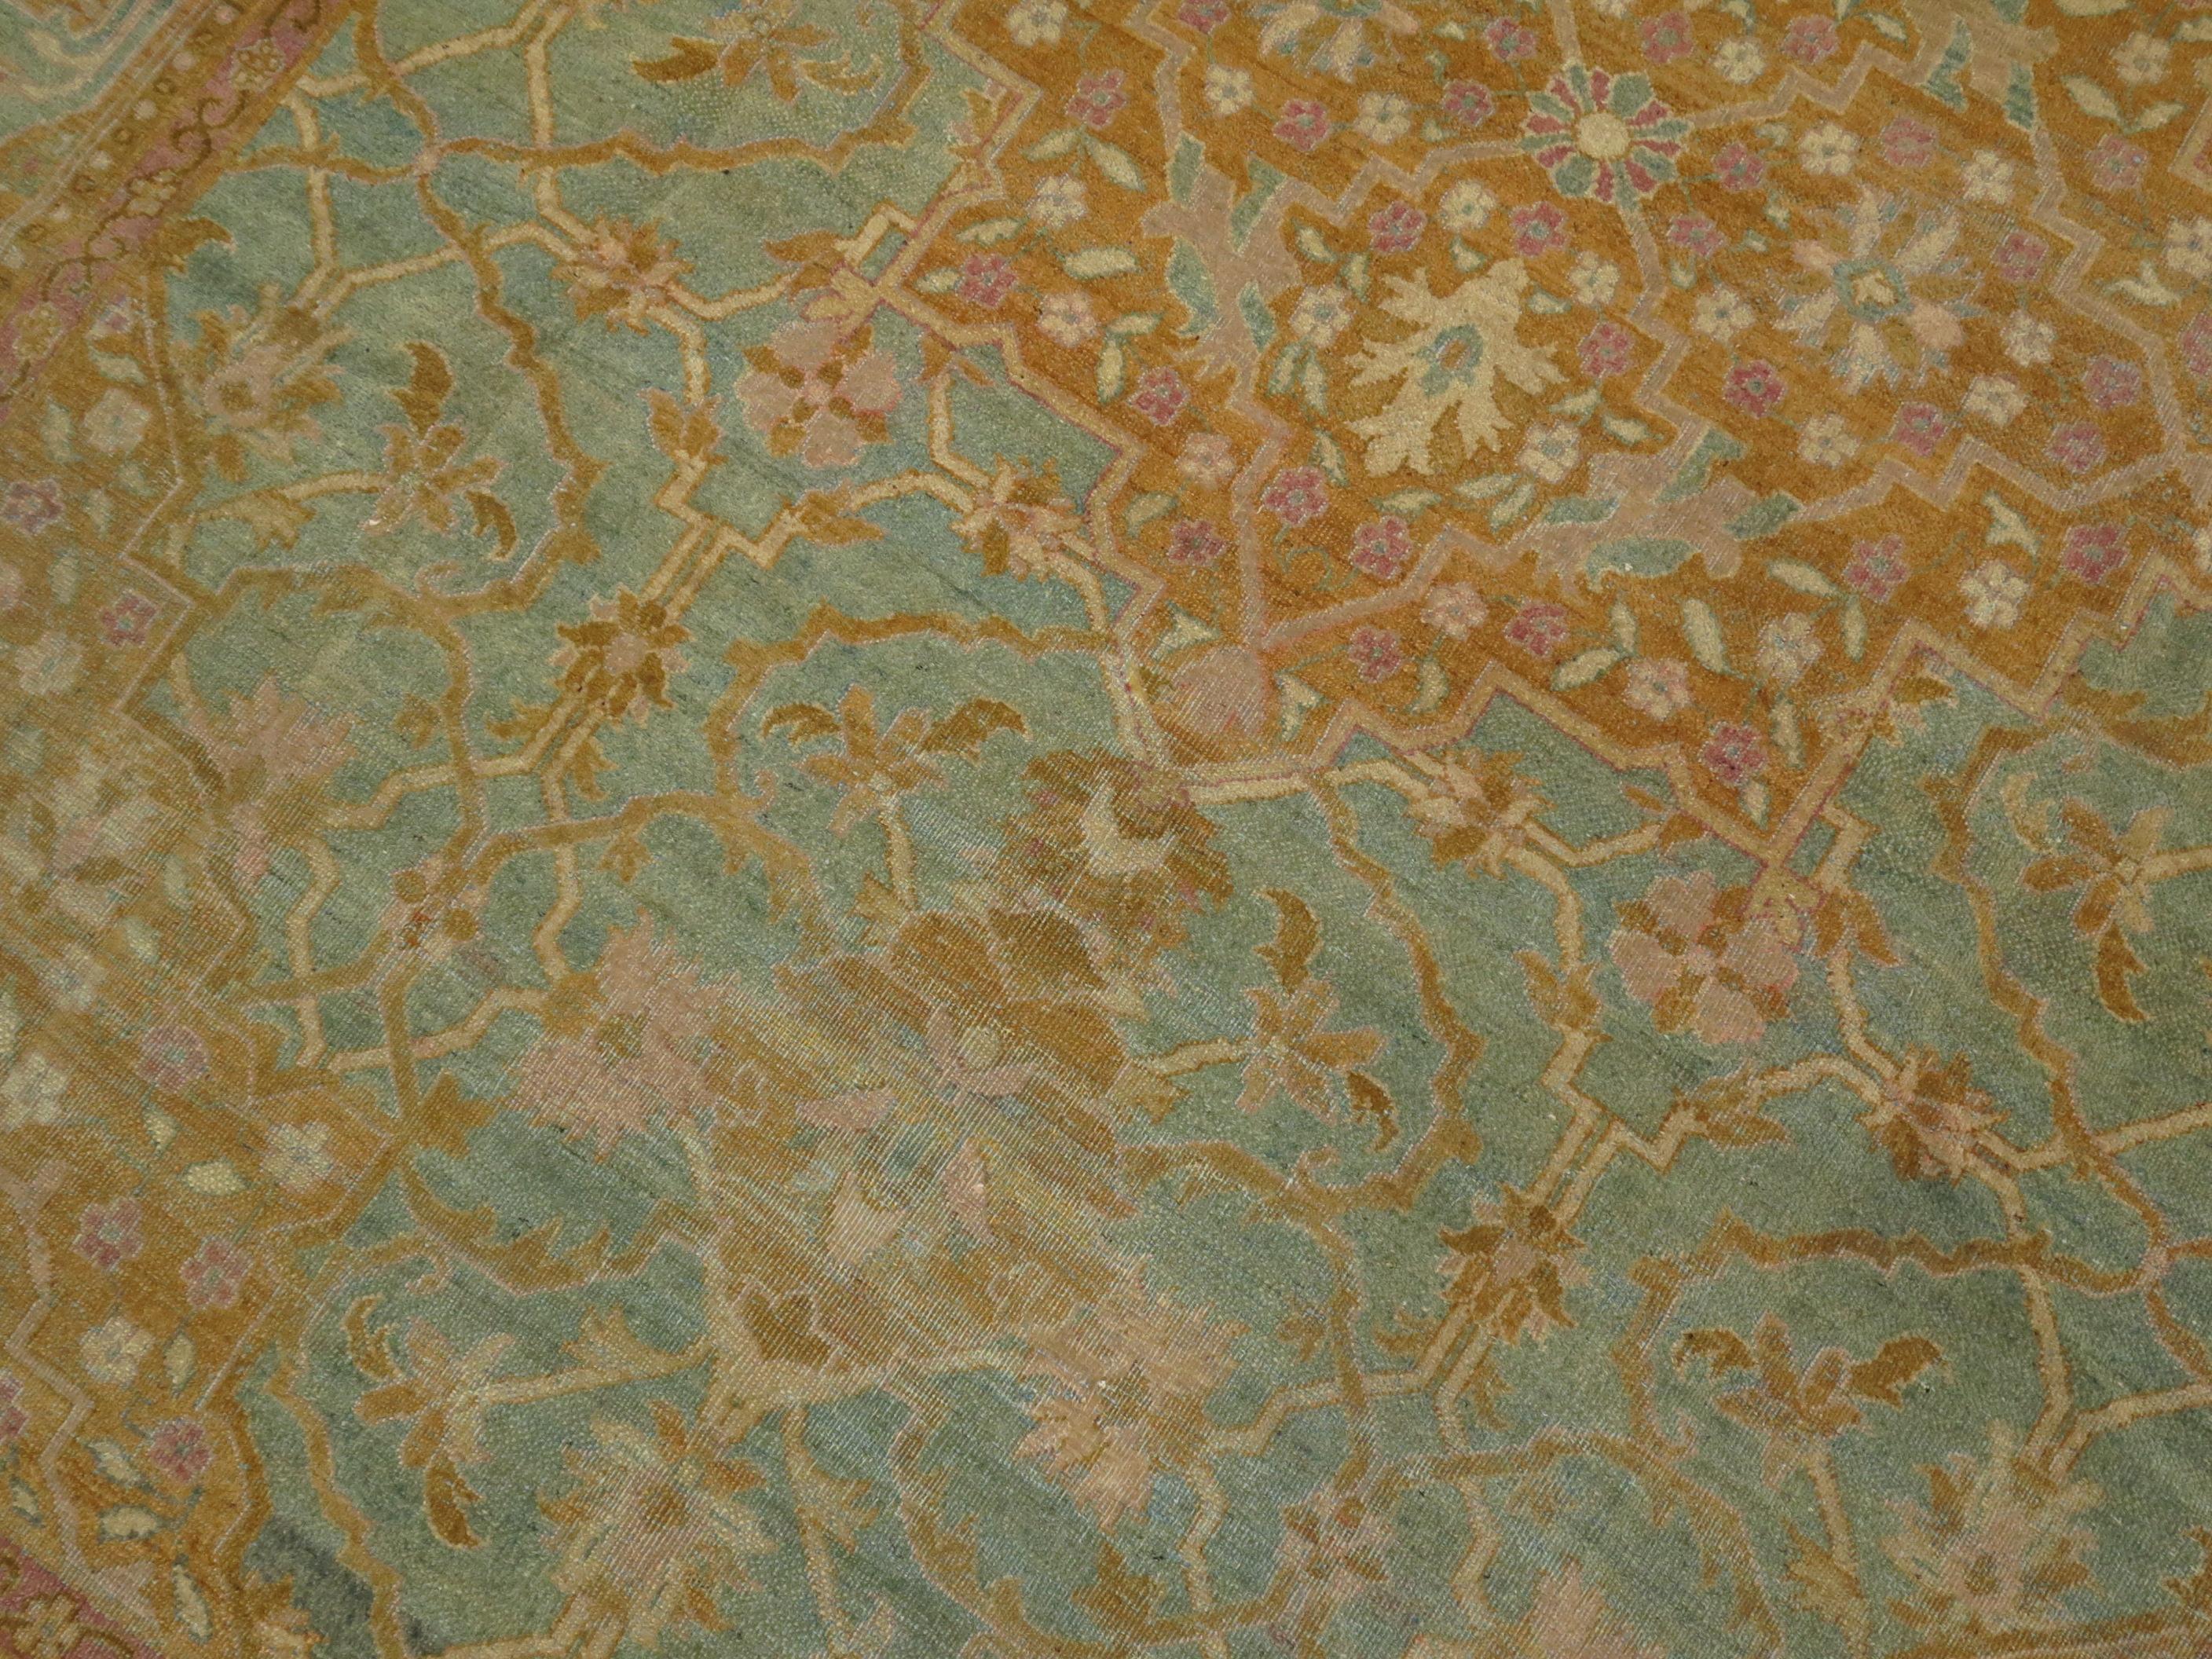 Turquoise Pink Antique Indian Amritsar Room Rug In Good Condition For Sale In New York, NY